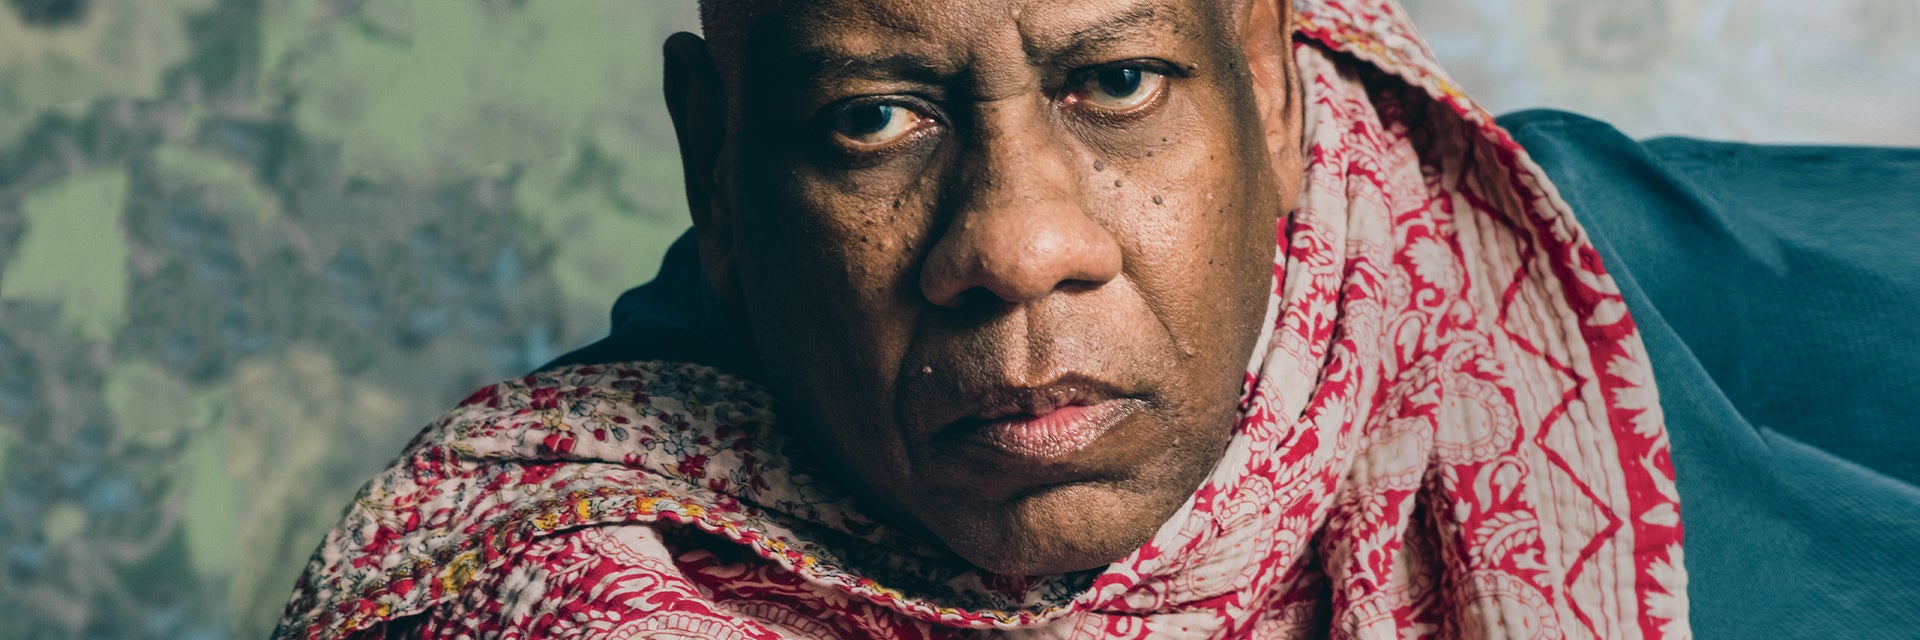 Former Vogue Editor André Leon Talley Releases Second Memoir ‘Chiffon Trenches’